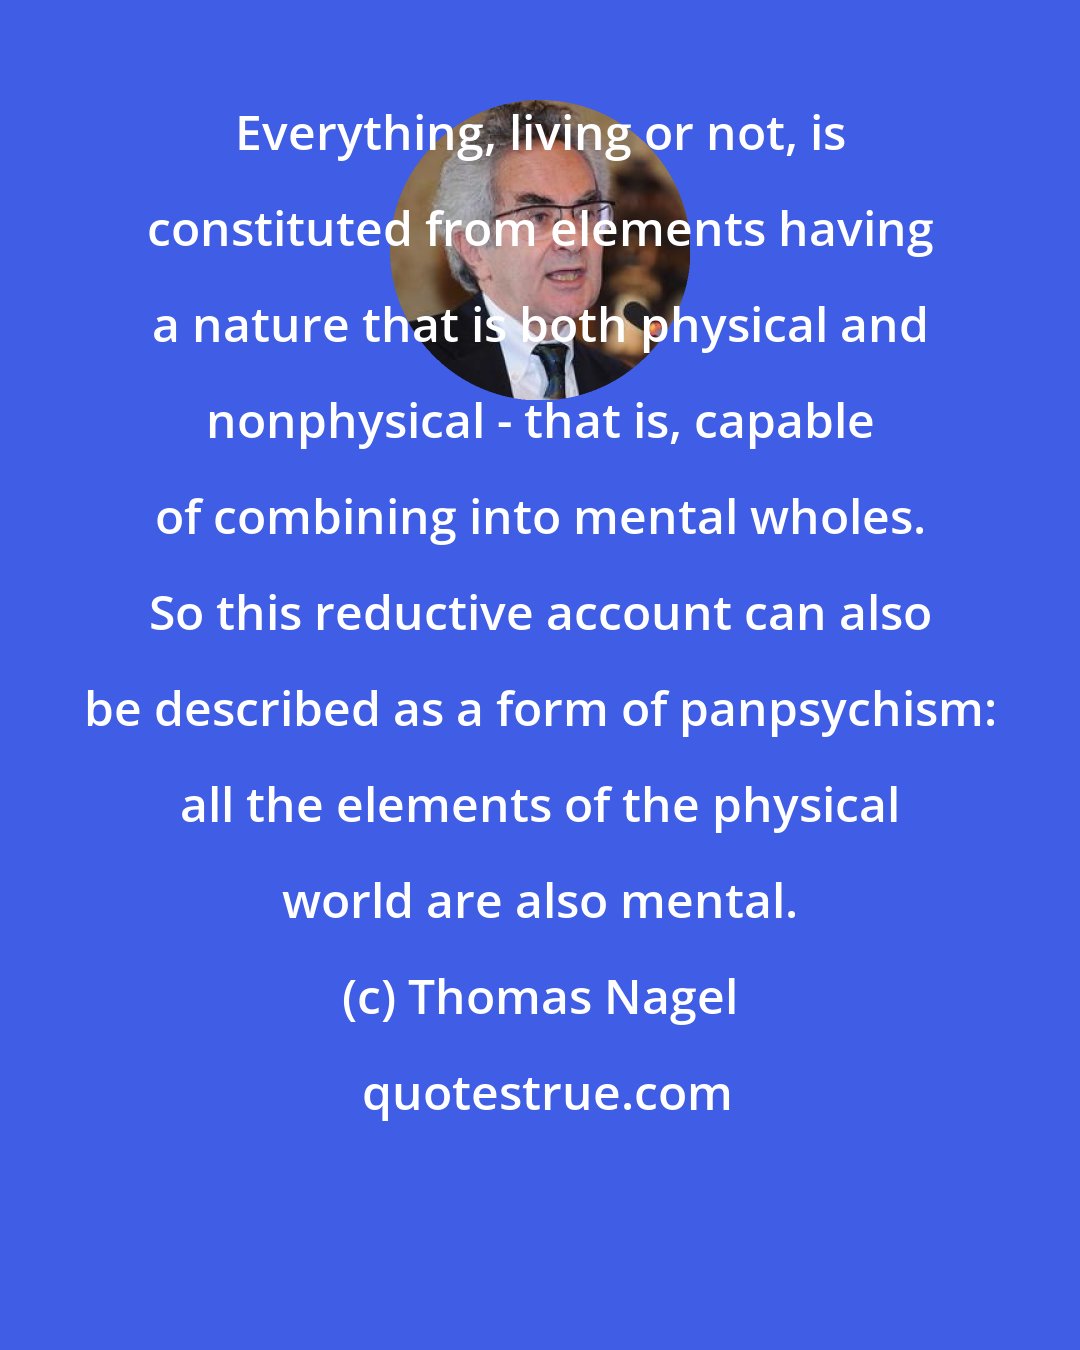 Thomas Nagel: Everything, living or not, is constituted from elements having a nature that is both physical and nonphysical - that is, capable of combining into mental wholes. So this reductive account can also be described as a form of panpsychism: all the elements of the physical world are also mental.